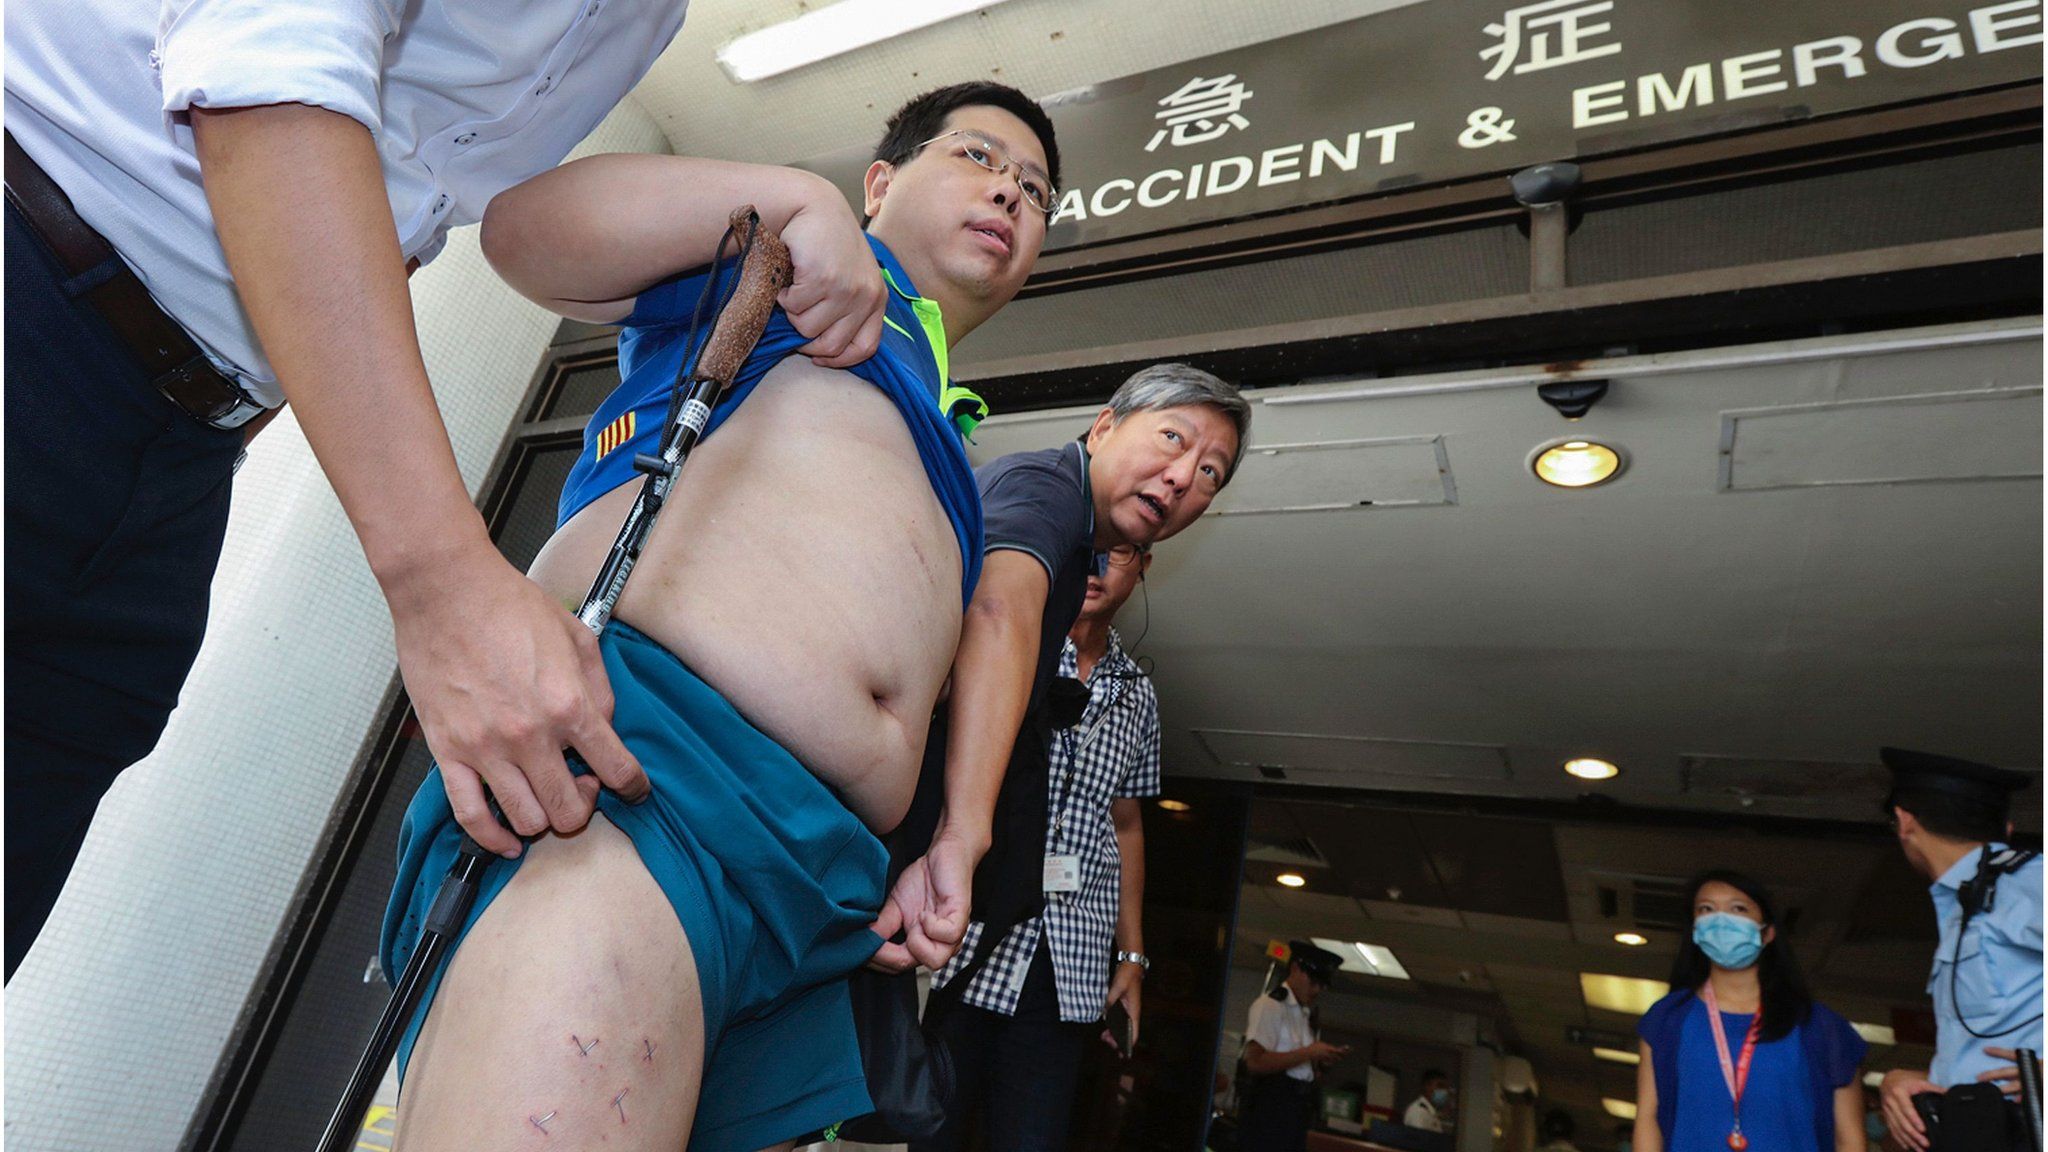 Hong Kong pro-democracy activist Howard Lam (L), who claims he was abducted, blindfolded and beaten by mainland China agents, shows his stapled thighs and injuries to the media in Hong Kong on 11 August 2017